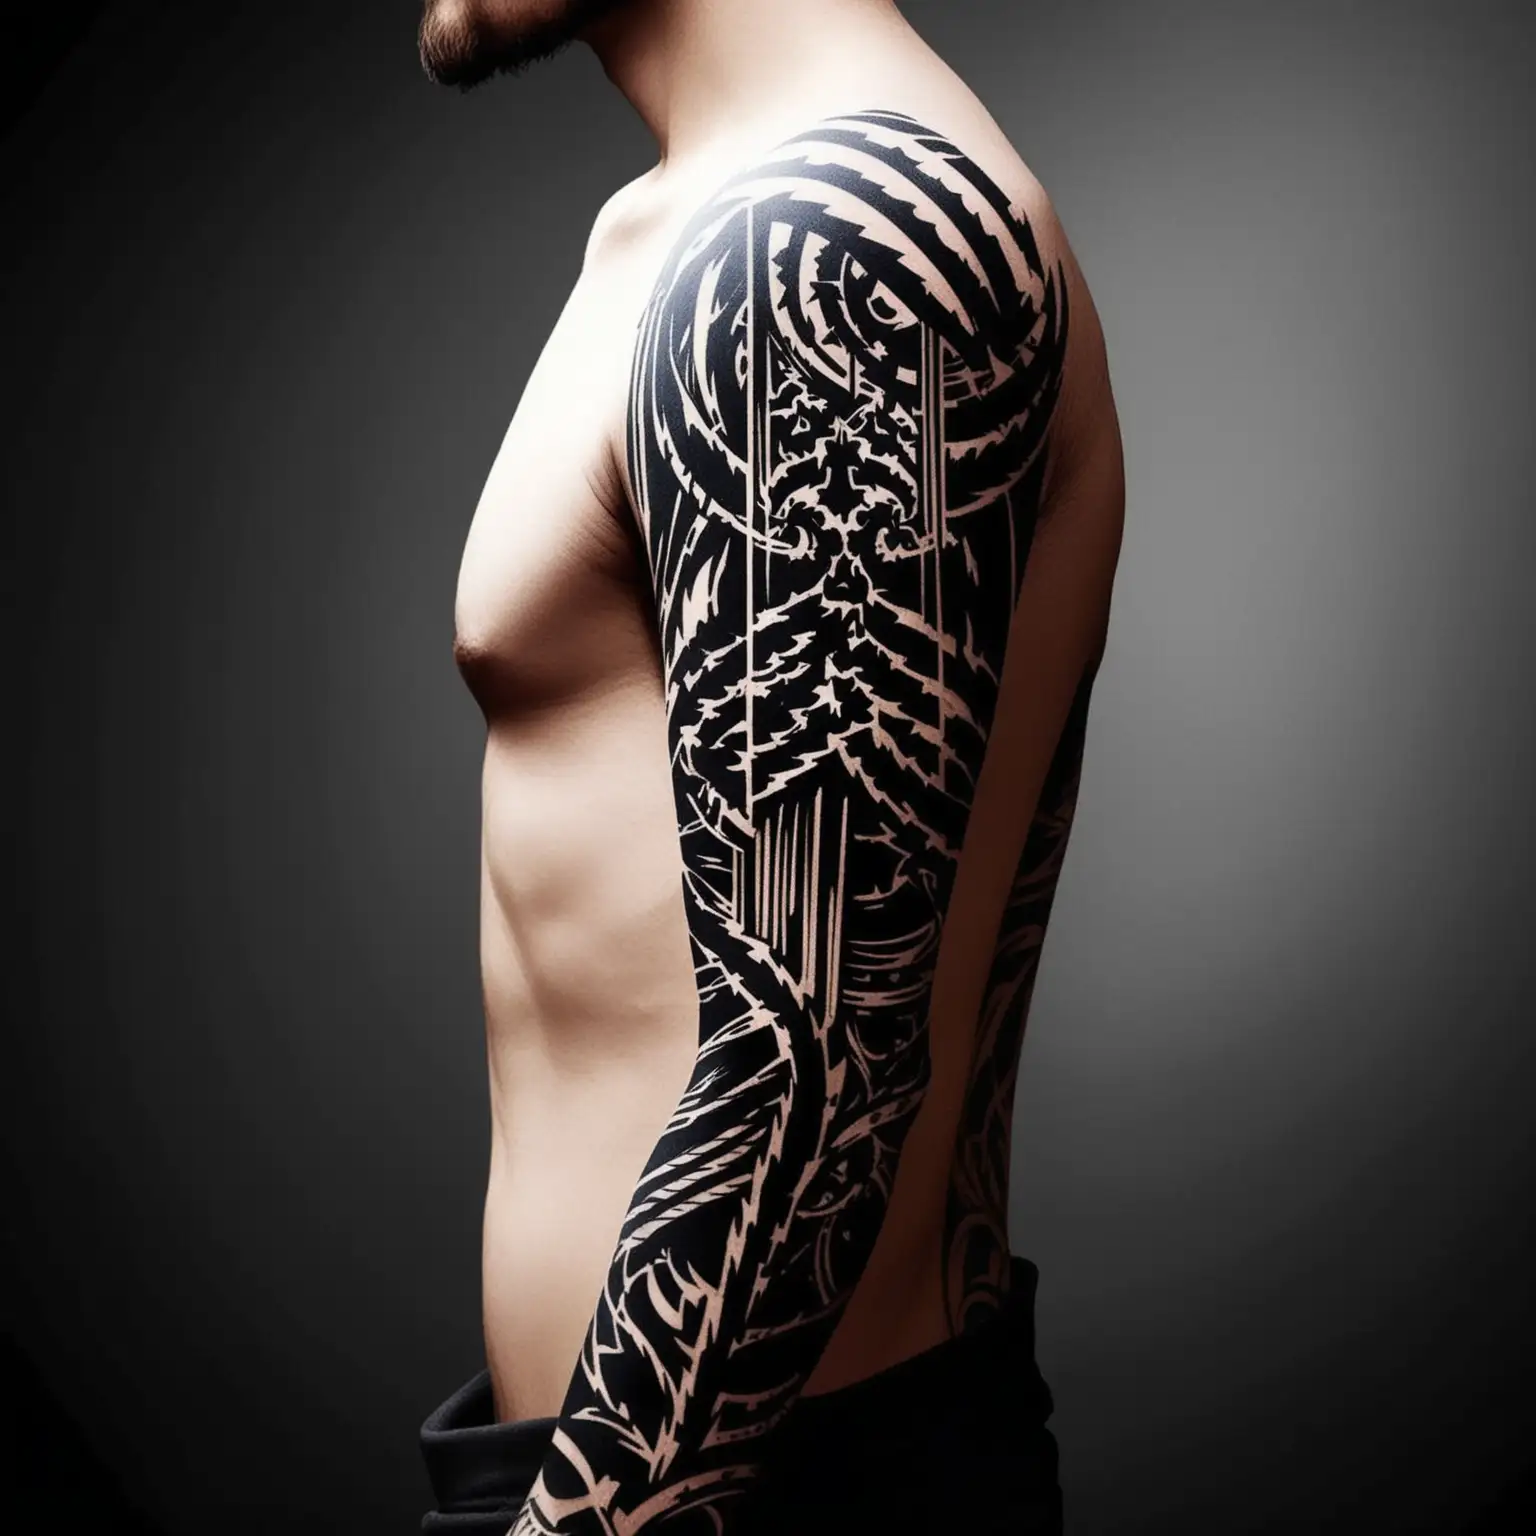 Innovative Mens Tattoo Sleeve Design with Negative Space Concept